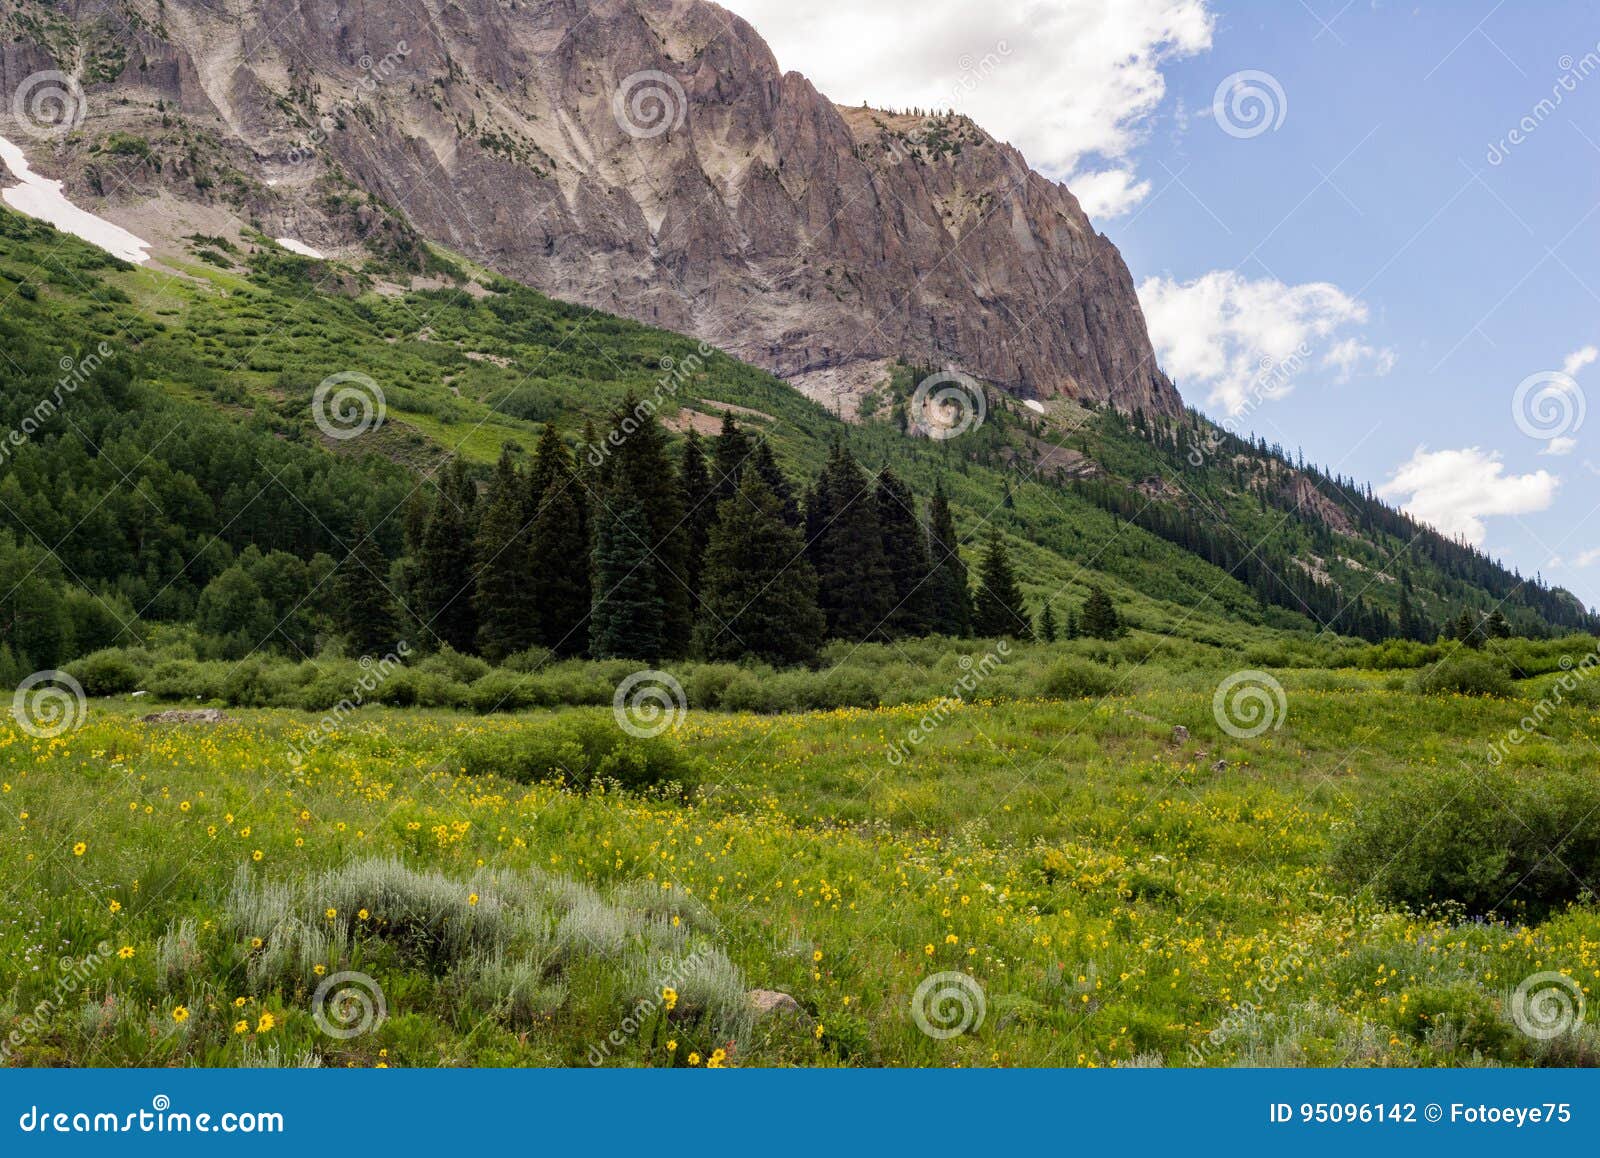 crested butte colorado mountain landscape and wildflowers